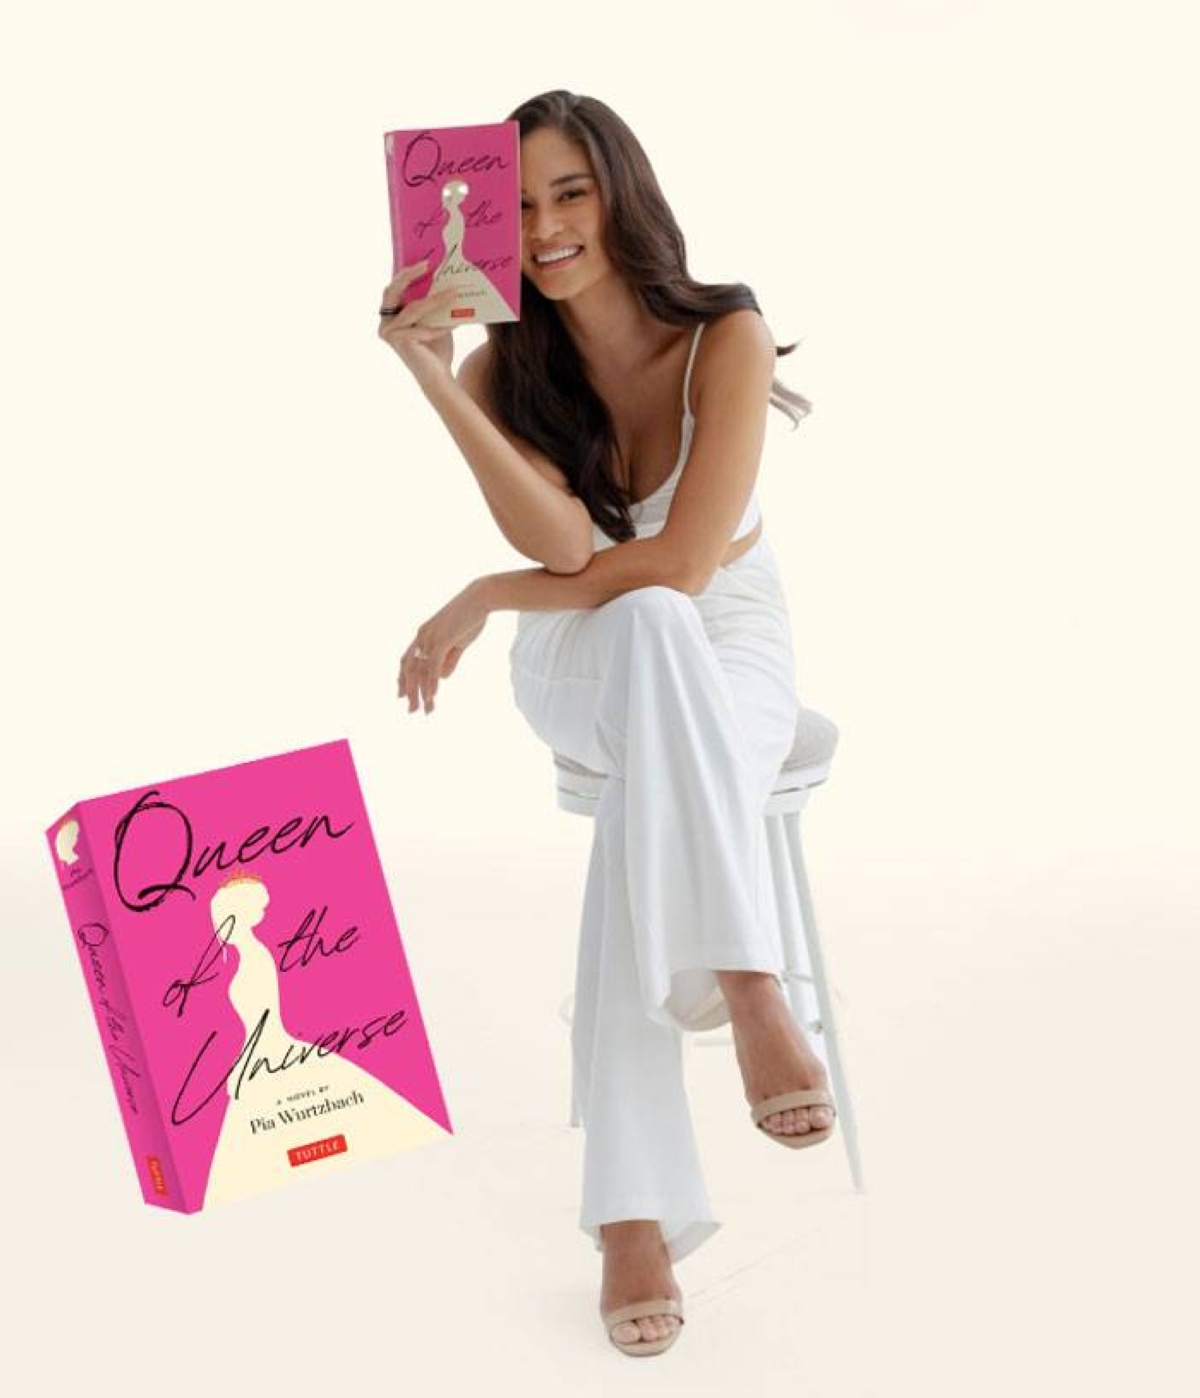 The entrepreneur, advocate, and former Miss Universe 2015 will launch her first novel, ‘Queen of the Universe,’ (inset) at the Manila International Book Fair.